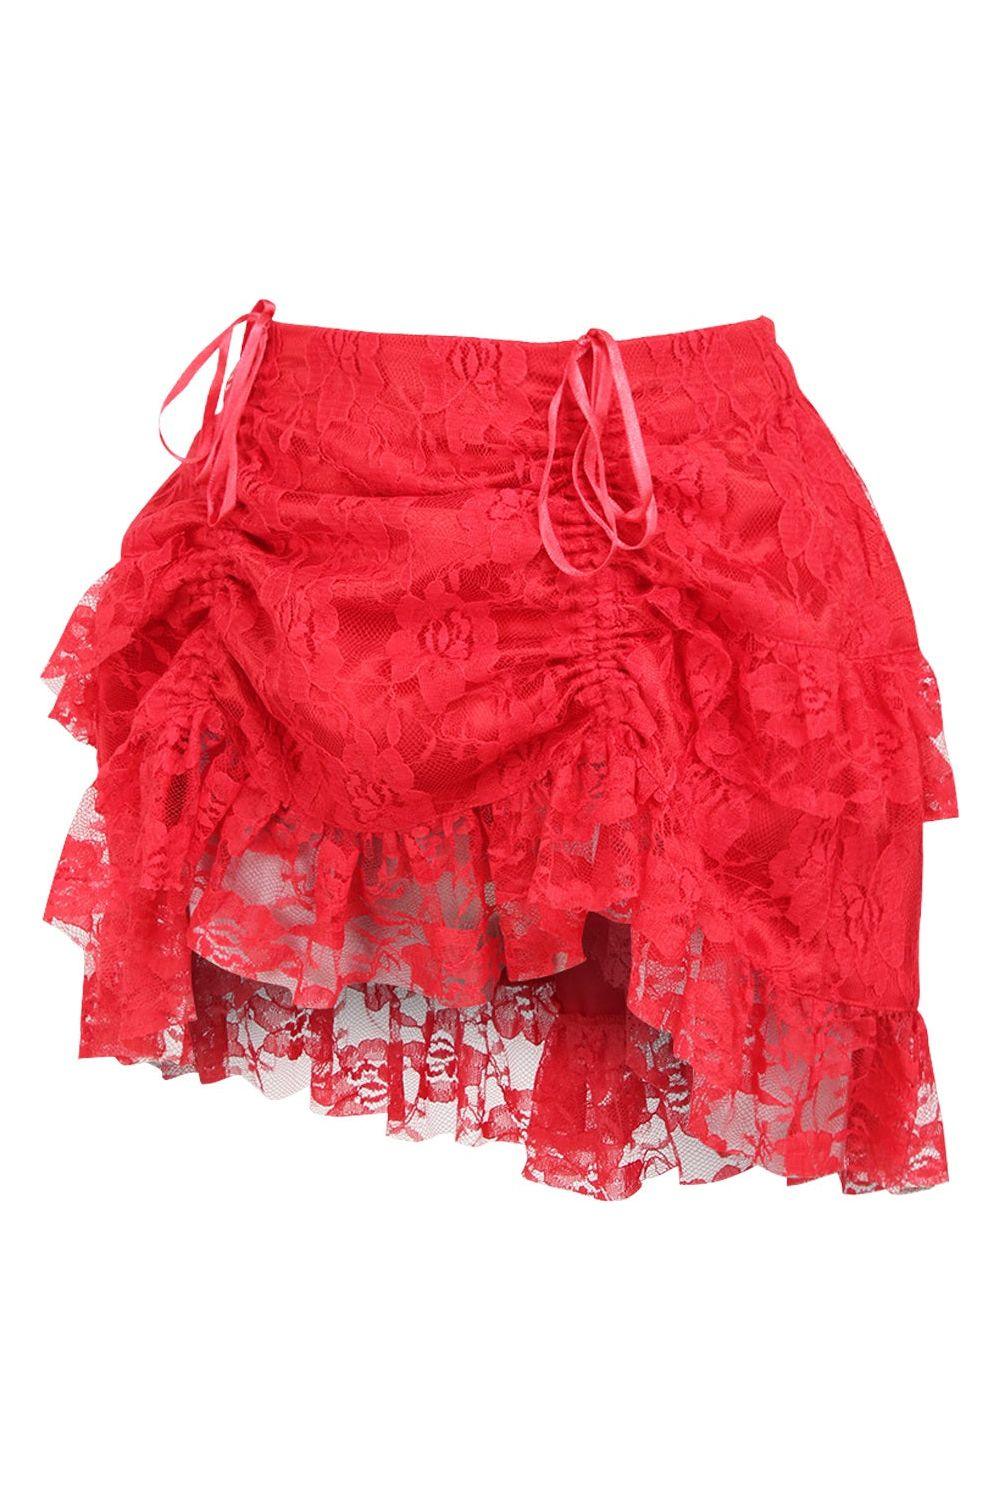 Red Lace Ruched Bustle Skirt